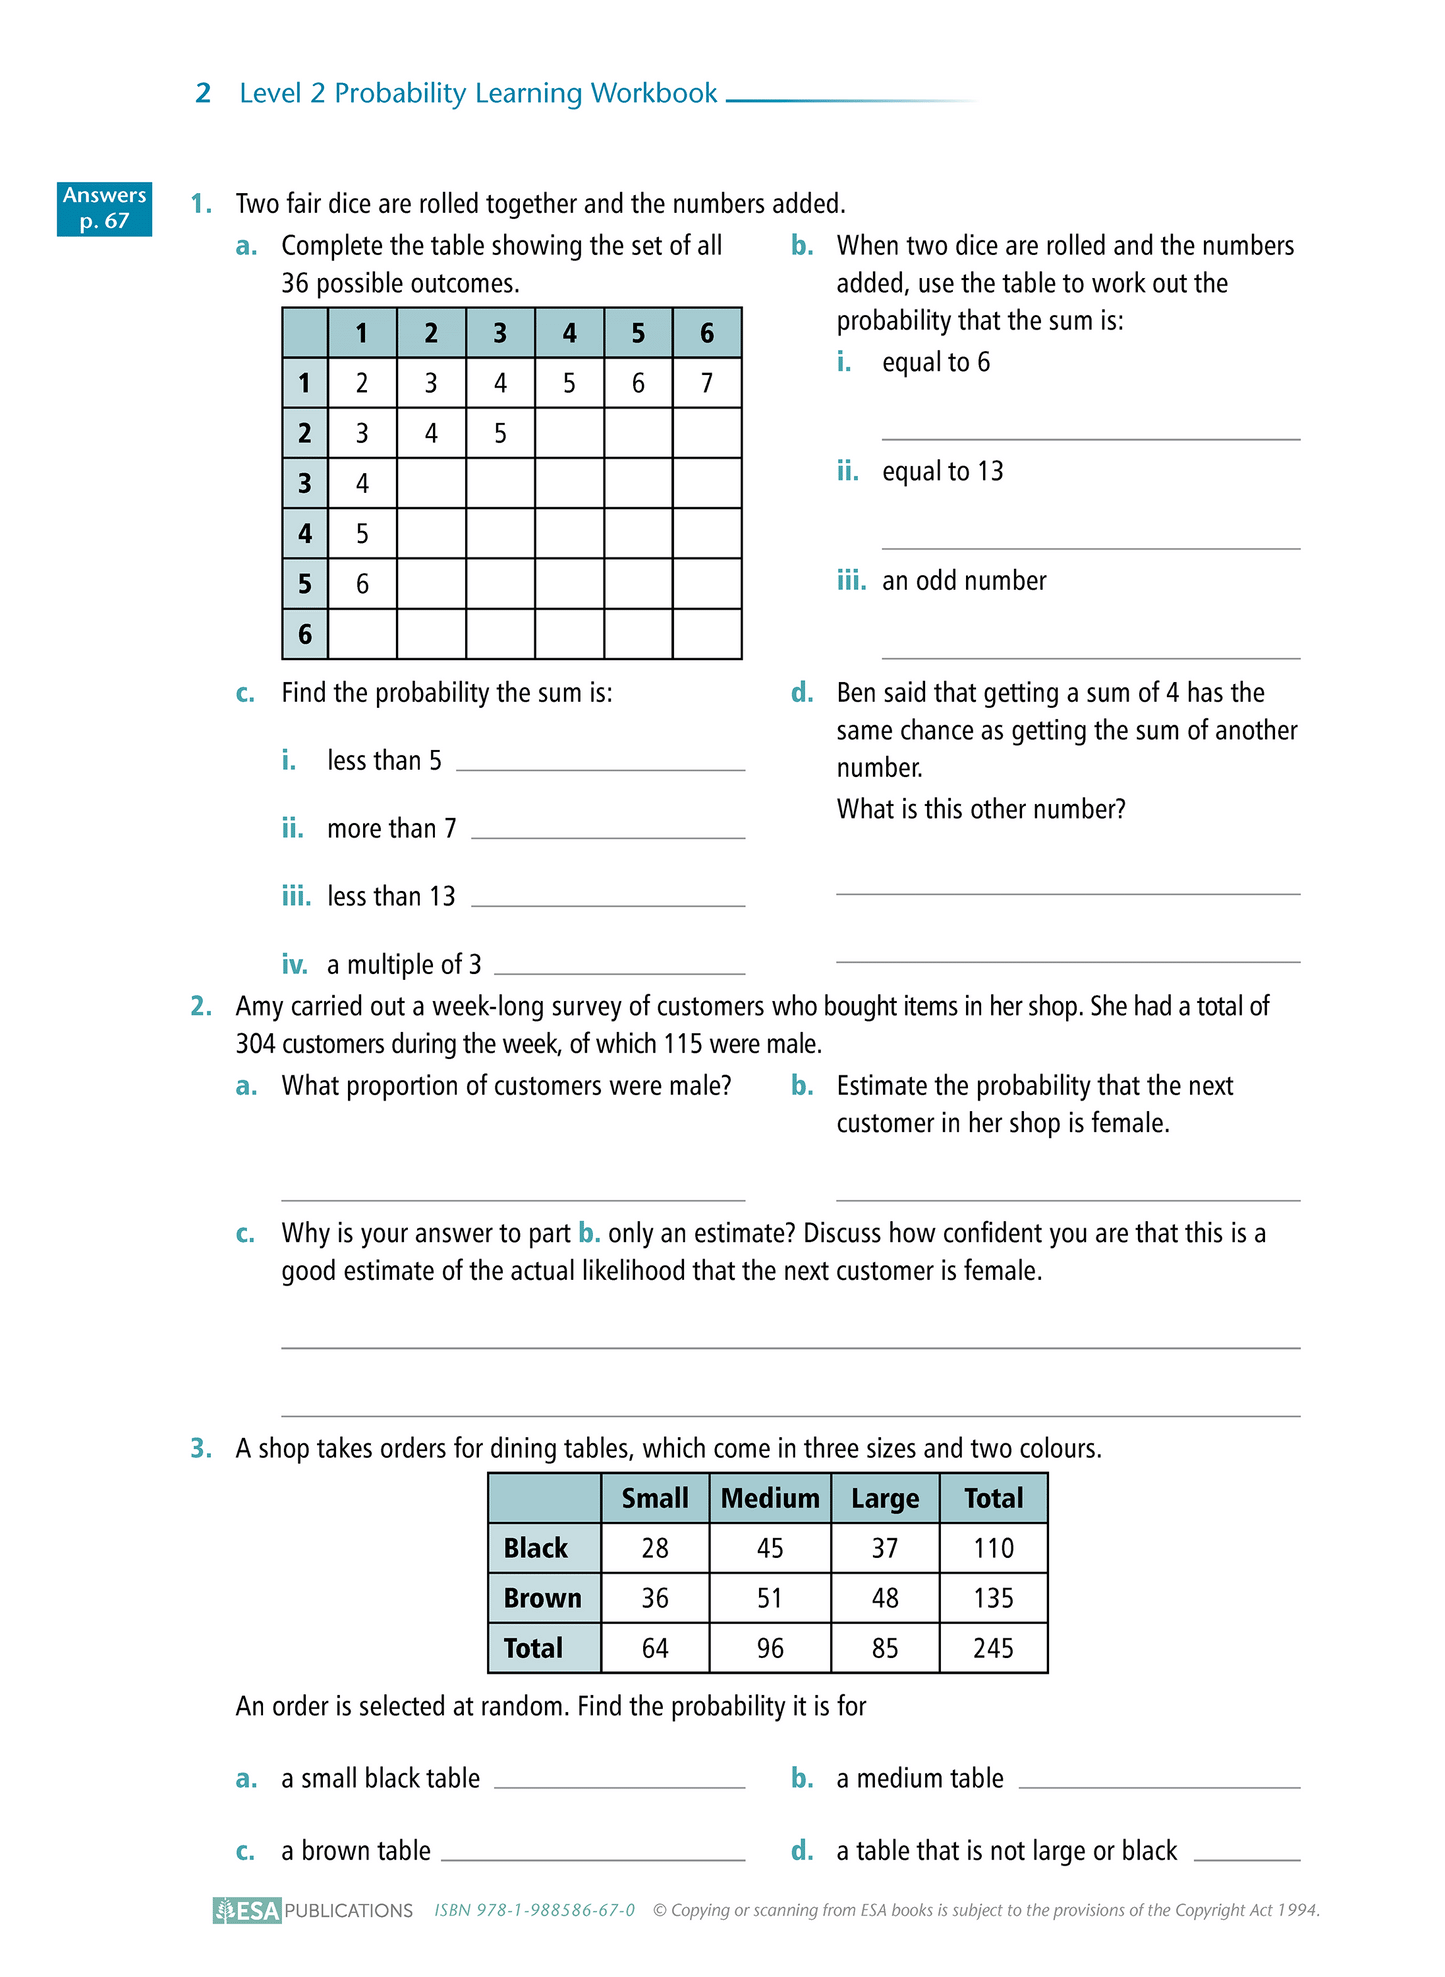 Level 2 Probability 2.12 Learning Workbook - SPECIAL (damaged stock at $5 each)